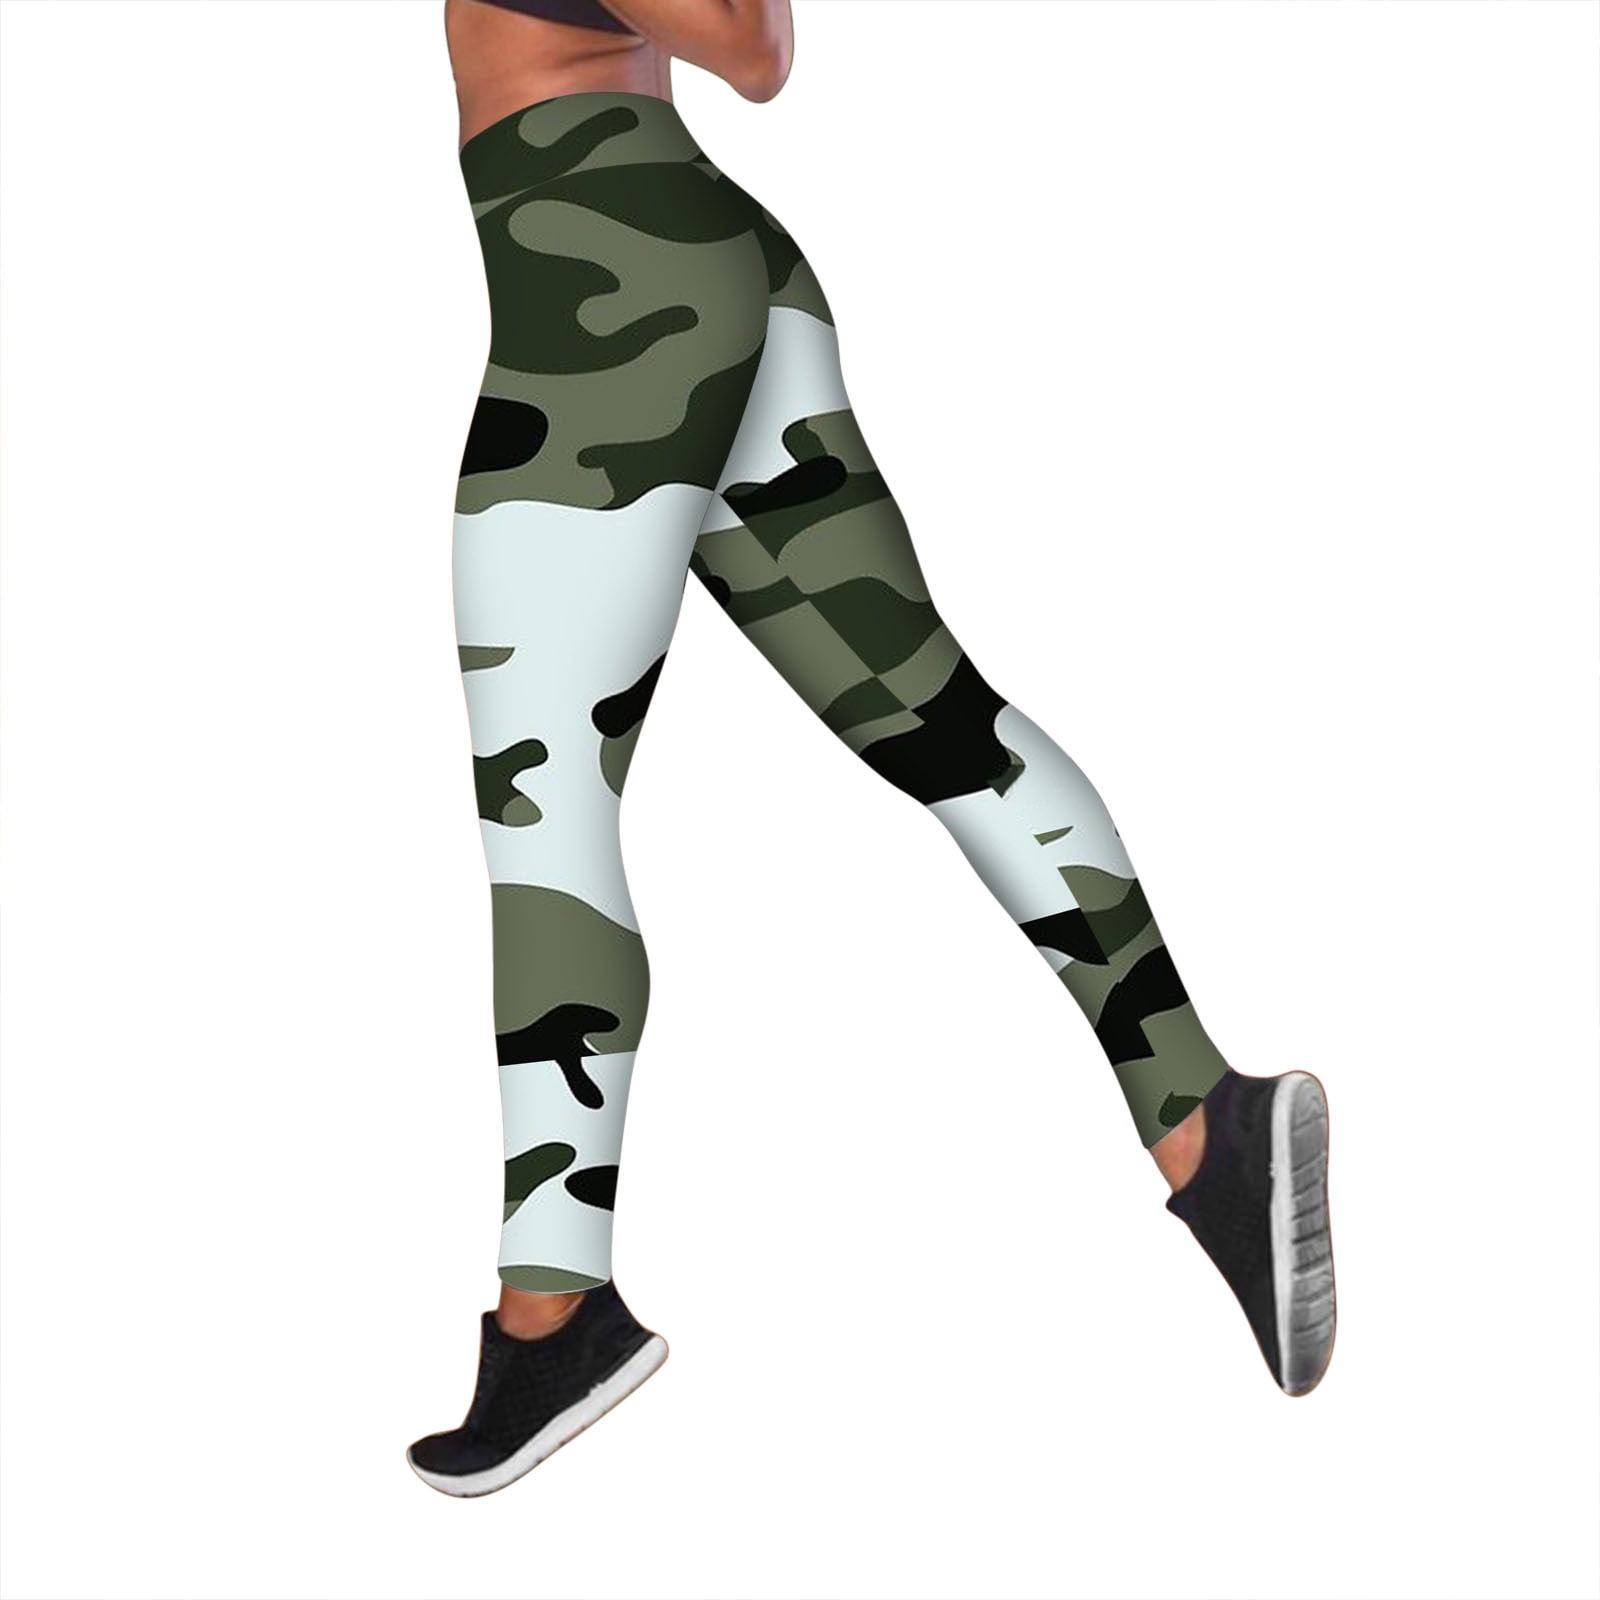 Leggings for Womens High Waist Camouflage Print Buff Lift Tummy Control Exercise Fitness Running Athletic Yoga Pants 